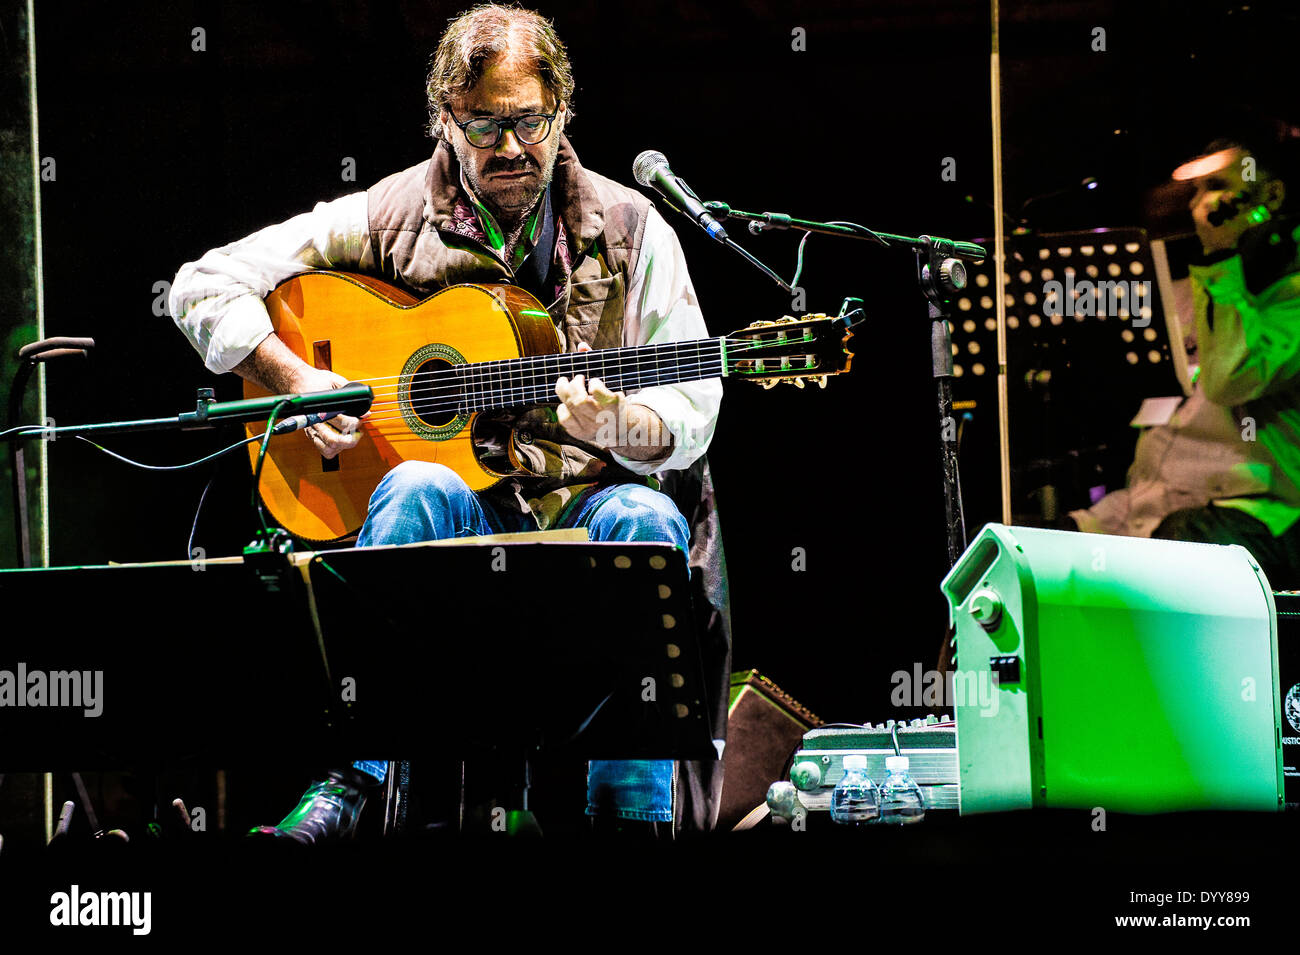 Turin, Italie. Apr 27, 2014. Torino Jazz Festival 27 avril 2014 - Al Di Meola Playng Beatles et plus - Al Di Meola Crédit : Realy Easy Star/Alamy Live News Banque D'Images